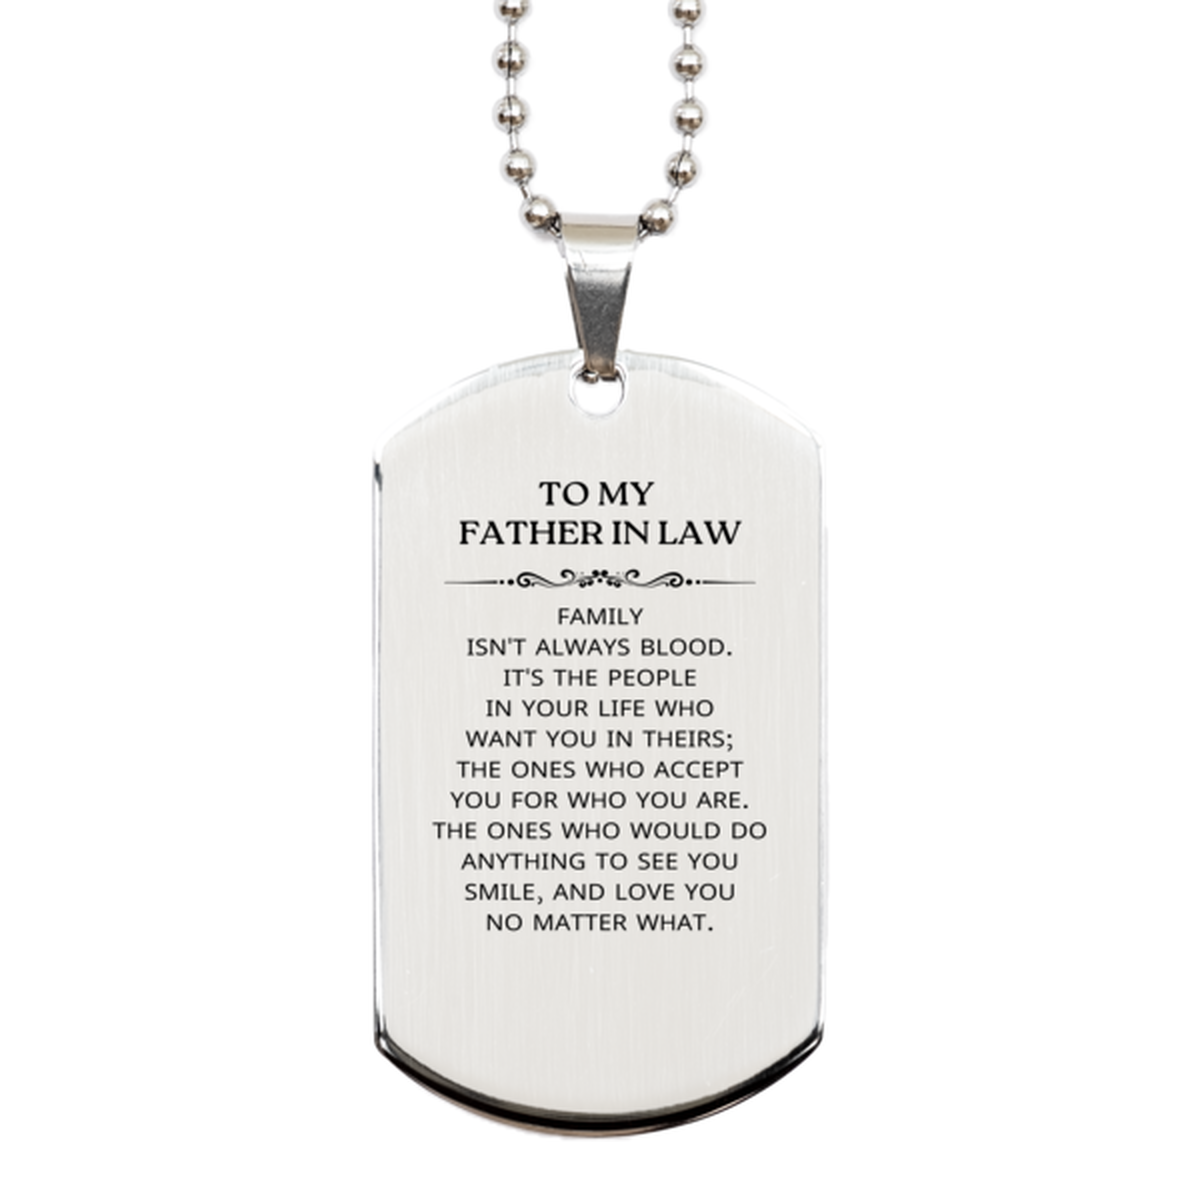 To My Father In Law Gifts, Family isn't always blood, Father In Law Silver Dog Tag, Birthday Christmas Unique Present For Father In Law